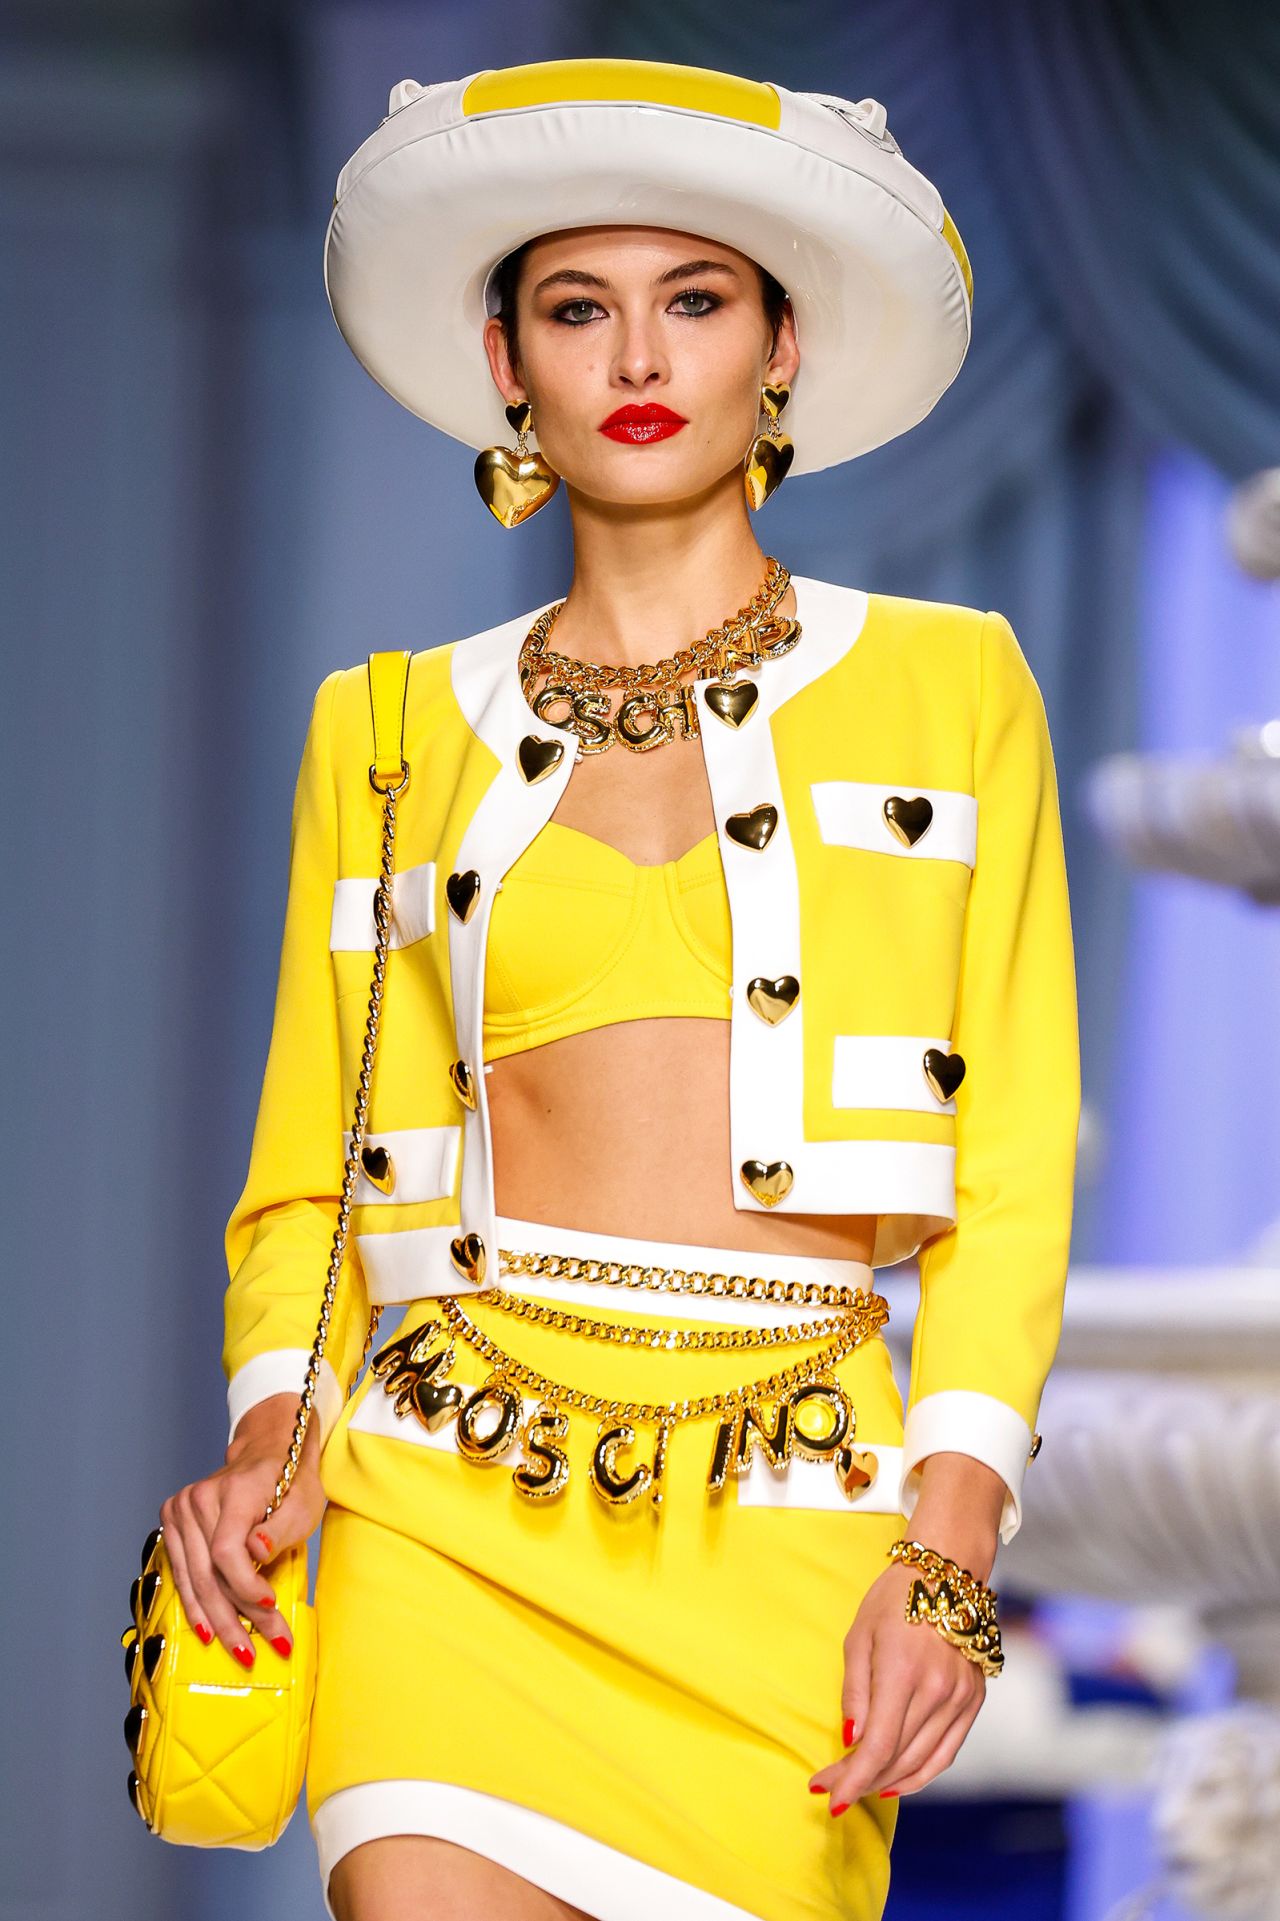 Moschino's designs focused on escapism and levity.